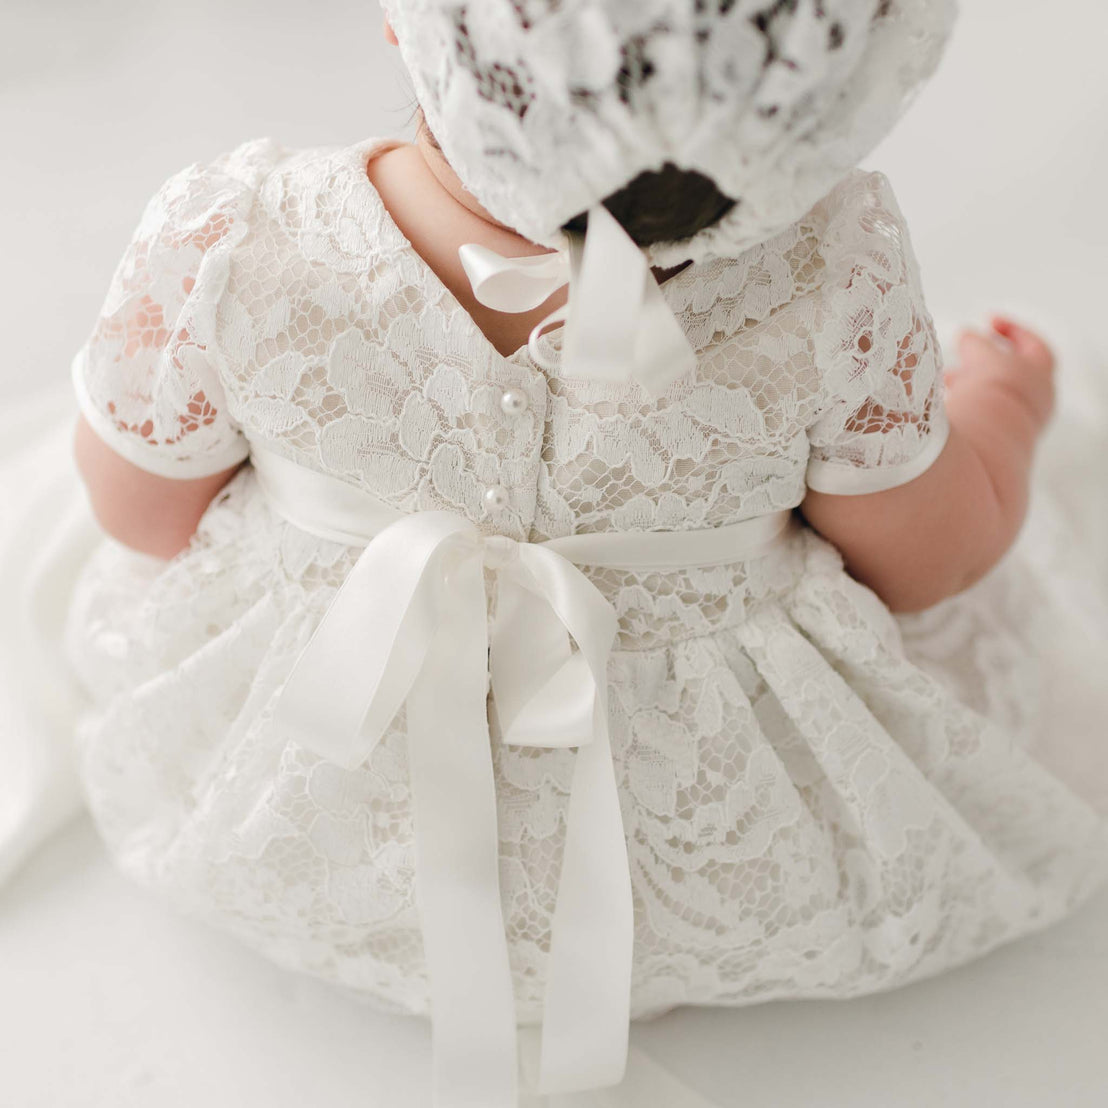 A baby wearing the Rose Christening Gown & Bonnet, viewed from behind, focusing on the details of the lace fabric, silk ribbon, and pearl buttons.